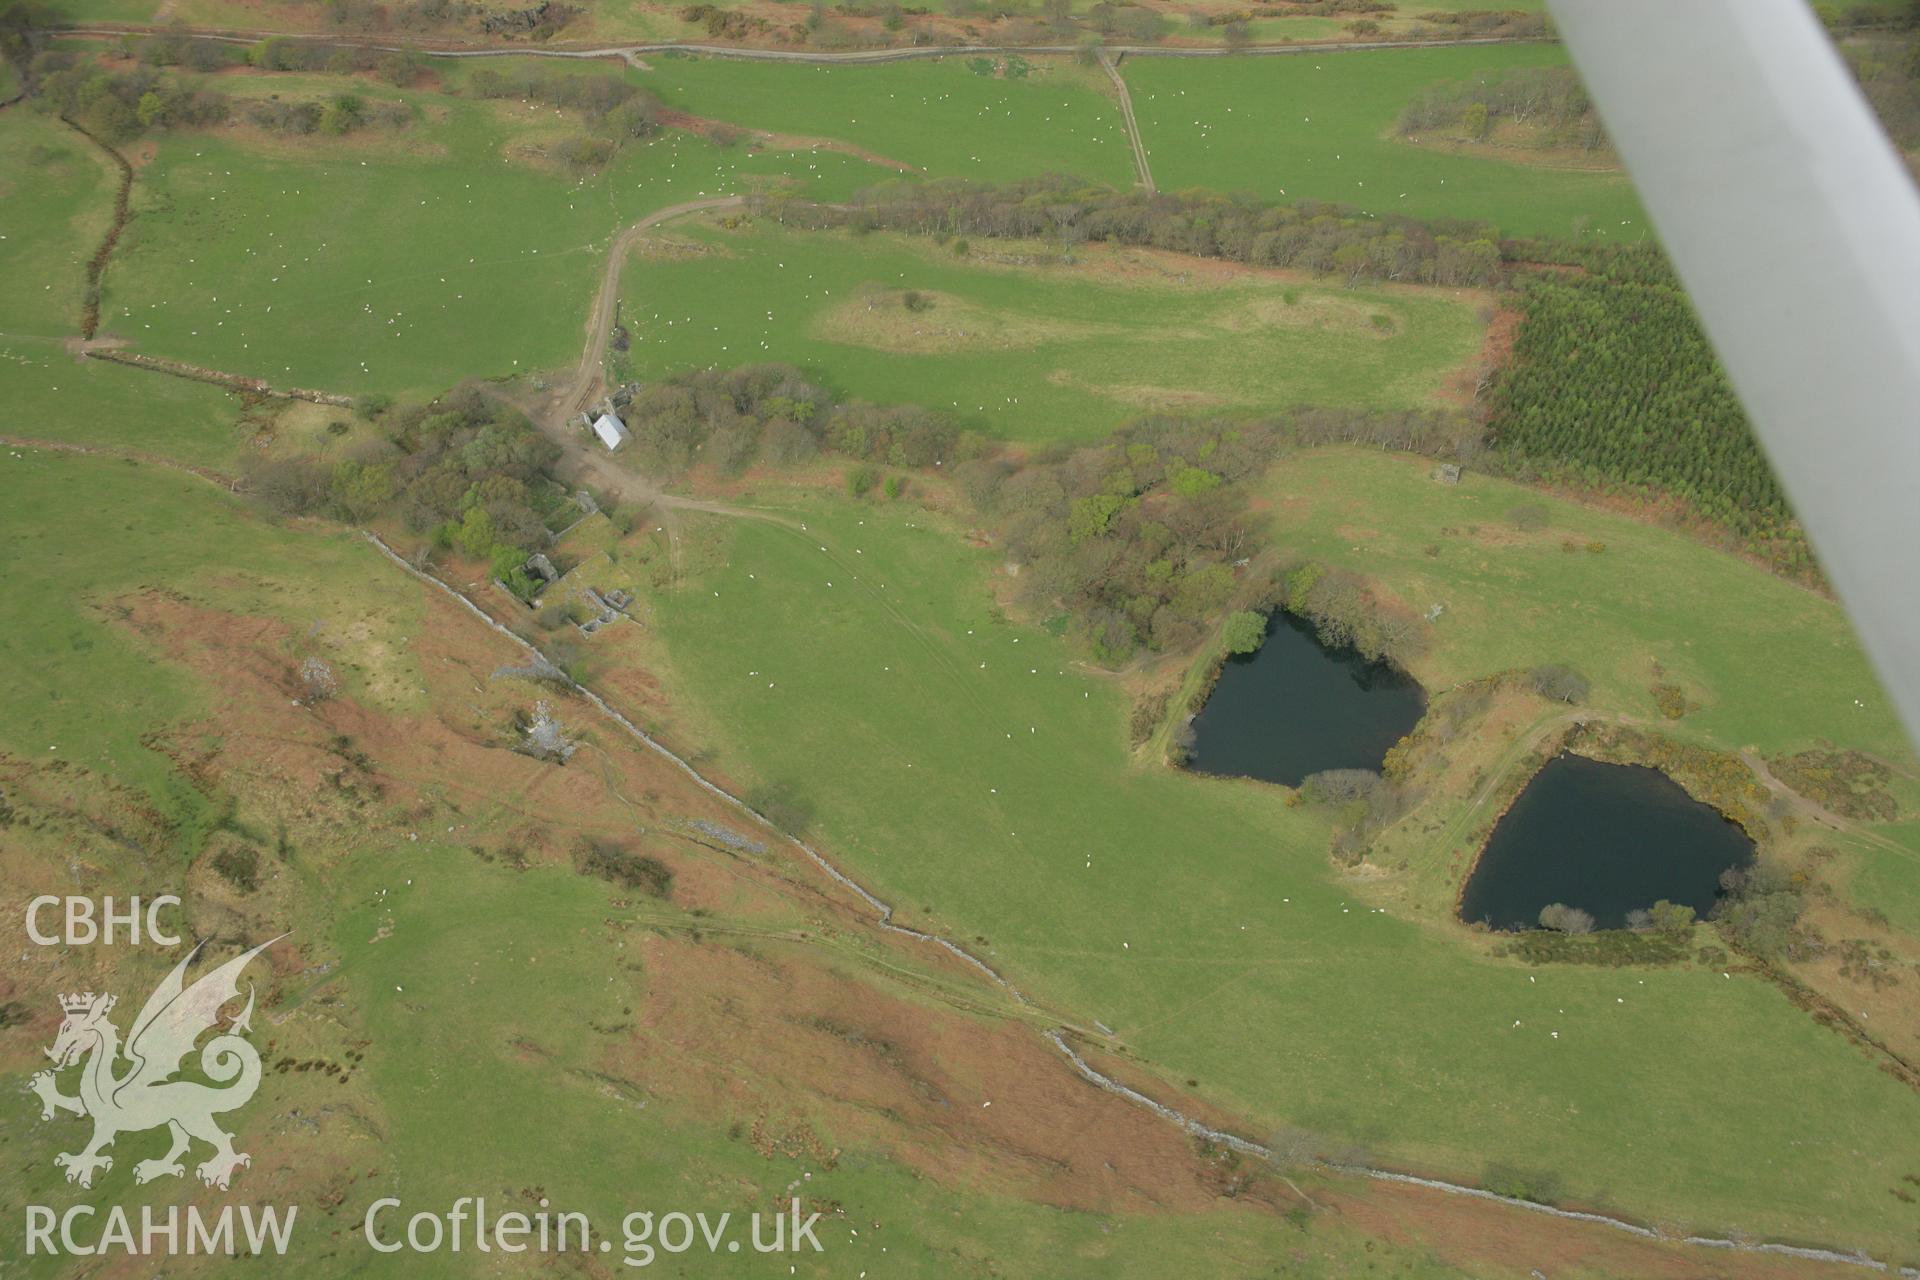 RCAHMW colour oblique aerial photograph of Bryndyfi Lead Mine. Taken on 17 April 2007 by Toby Driver